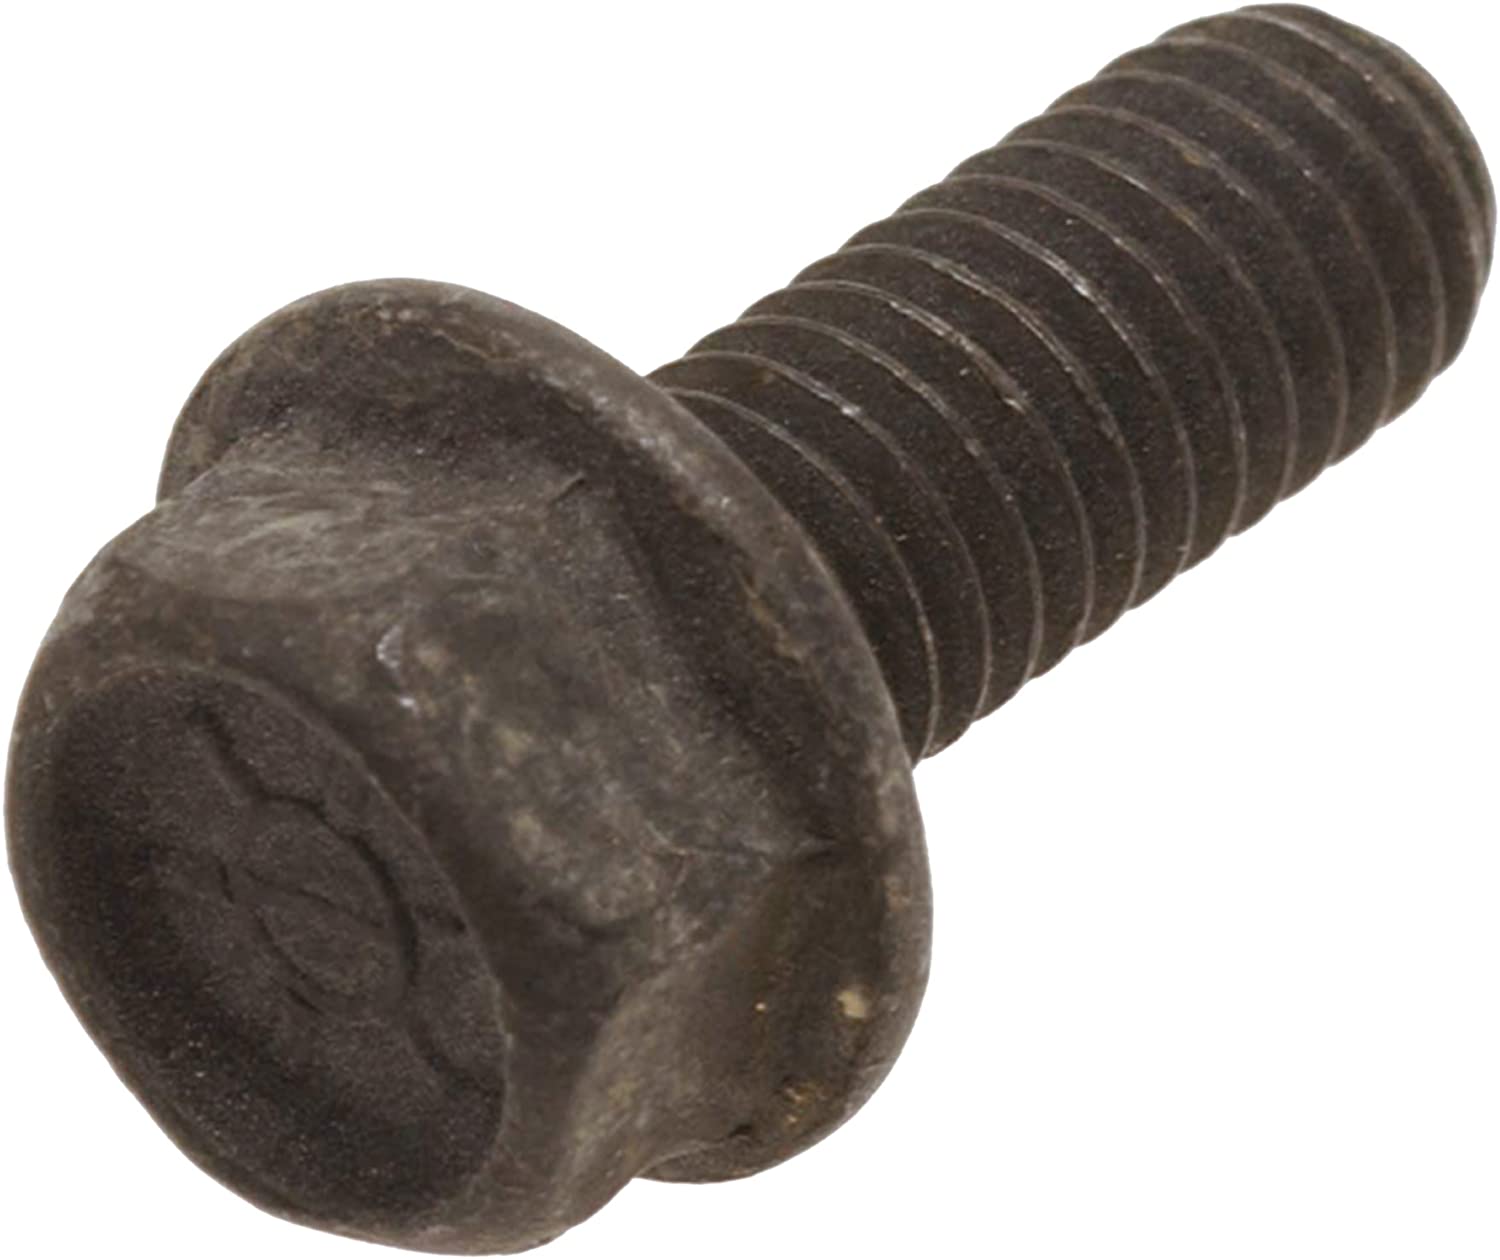 GM Genuine Parts 9424320 .375 x 16 x 1 in Bolt